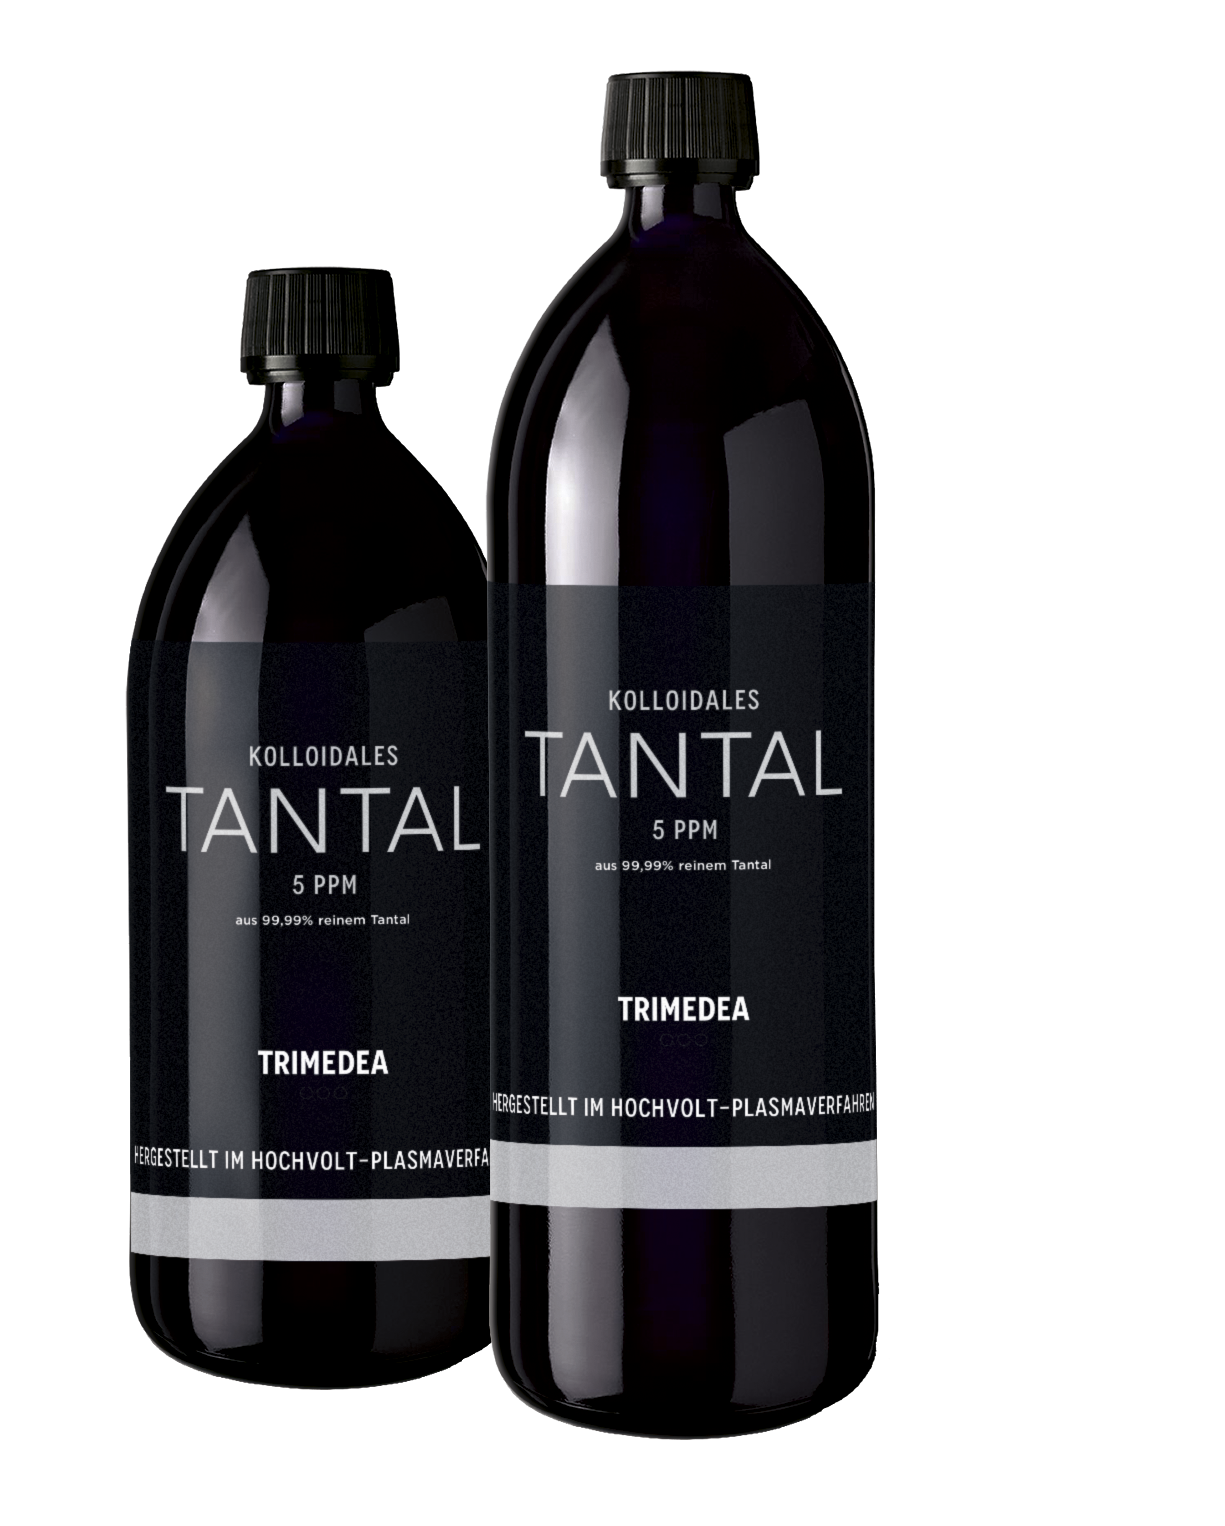 Colloidal tantalum - real colloids bioavailable and effective